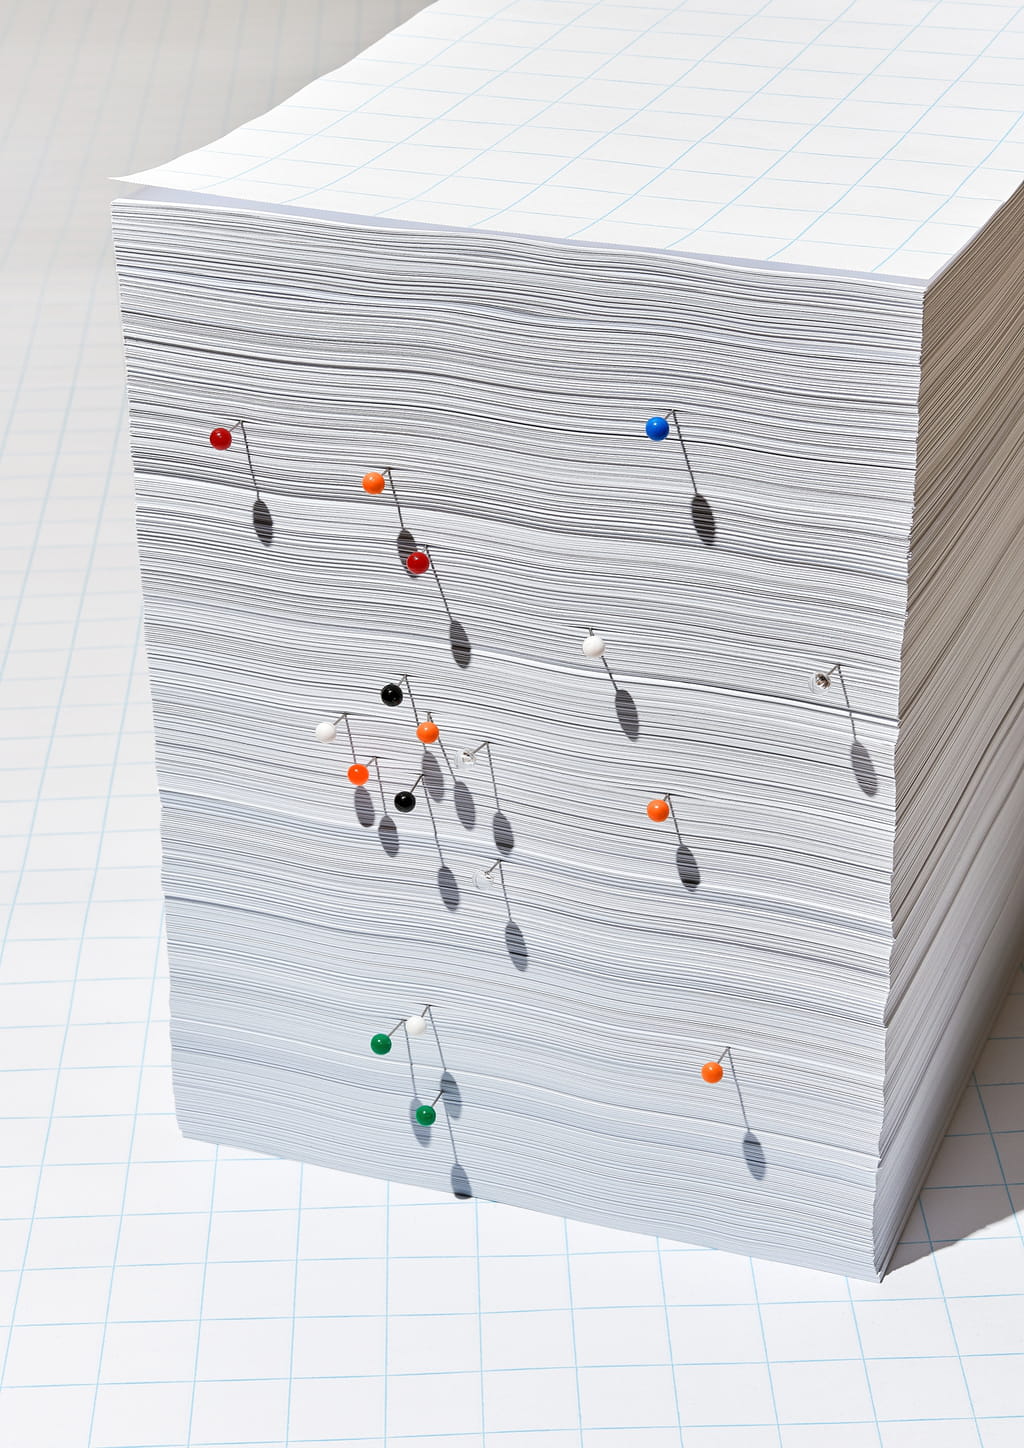 Photograph of a stack of gridded white paper with colourful needles inserted in it.